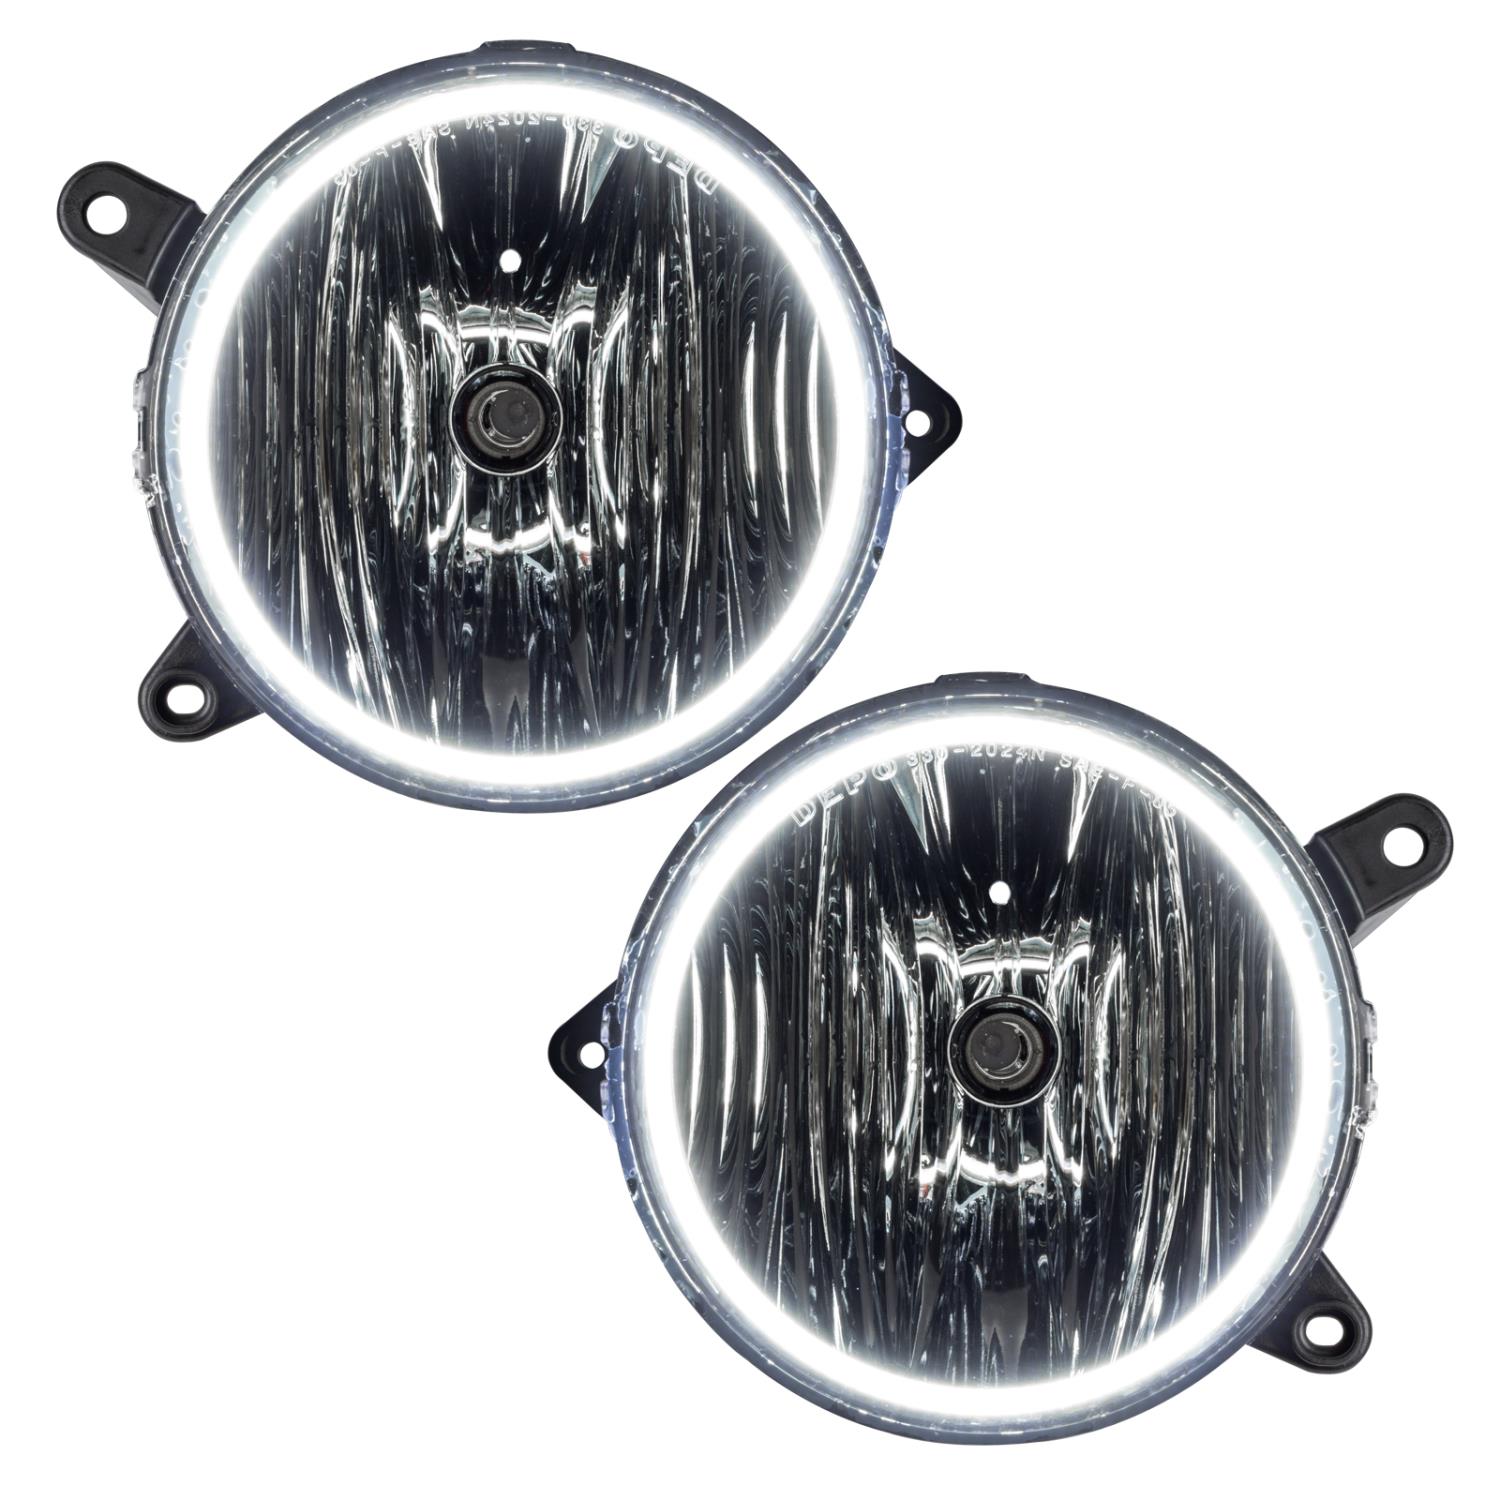 LED HALO Fog Light Assembly Comes with preinstalled white LED Halos